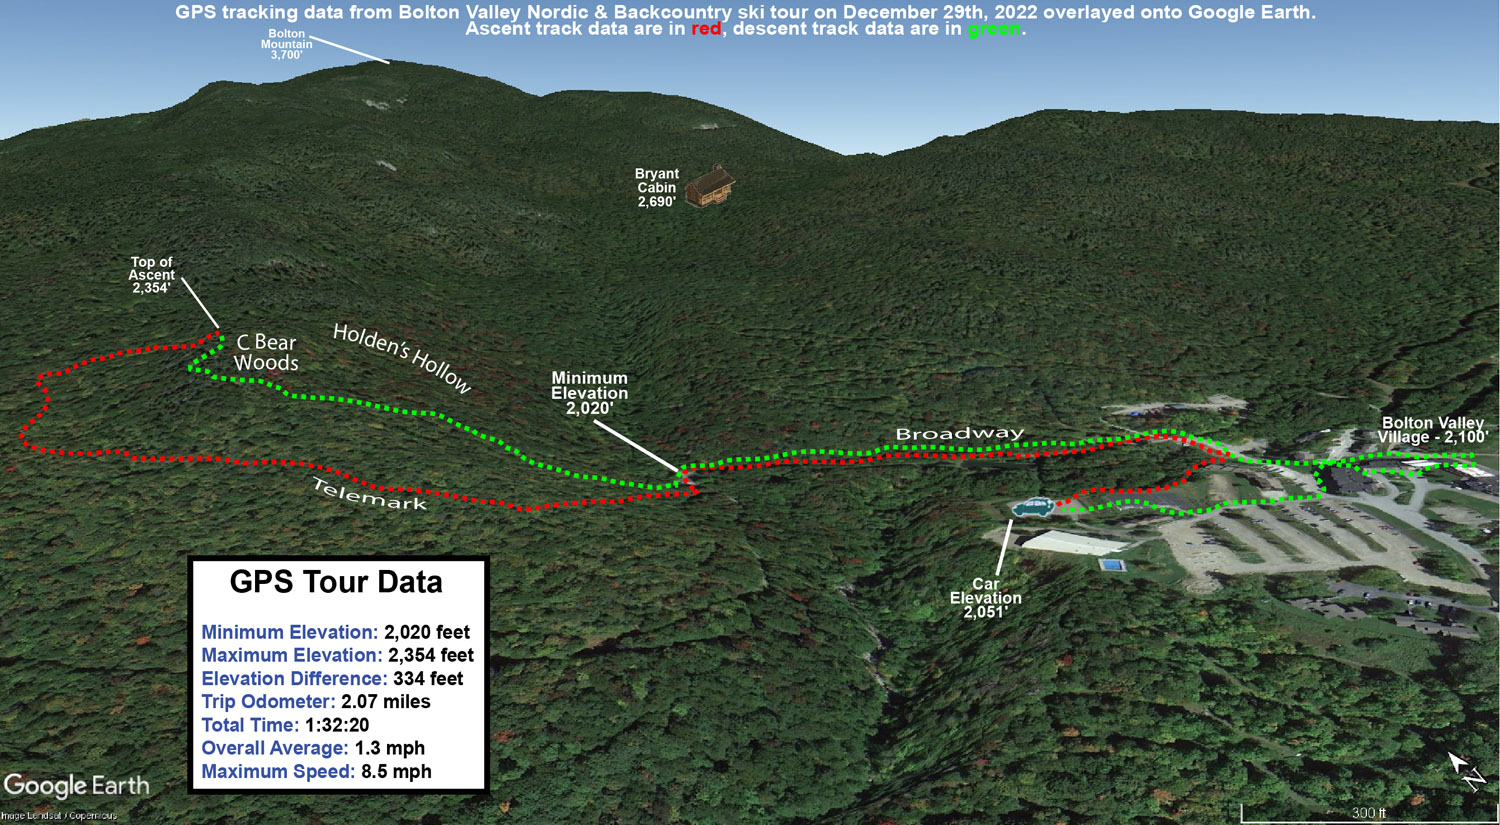 A Google Earth map with GPS tracking data from a ski tour on the Nordic and Backcountry Network at Bolton Valley Resort in Vermont